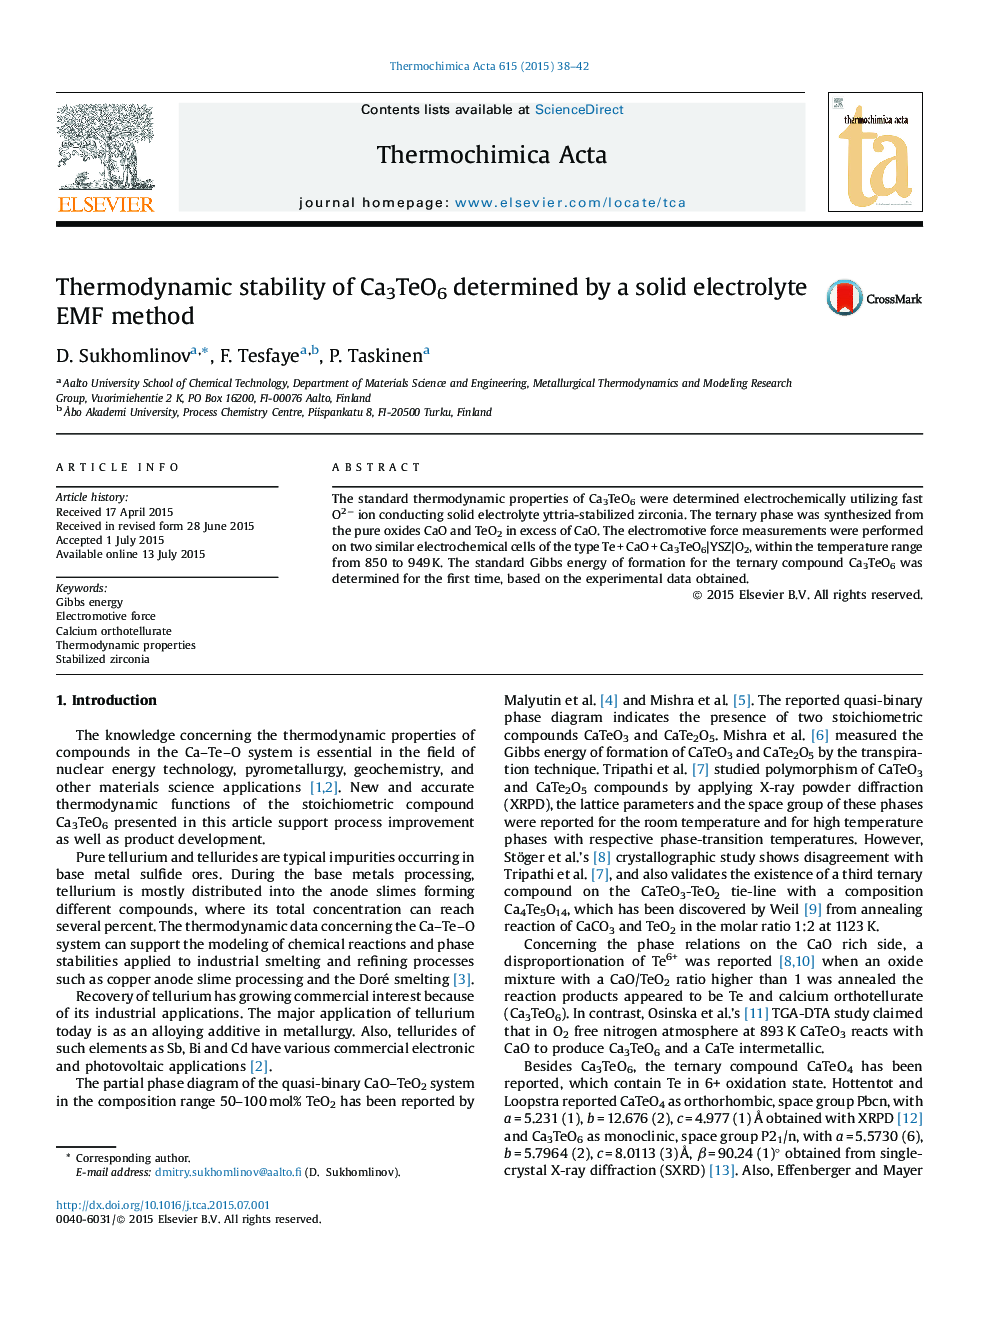 Thermodynamic stability of Ca3TeO6 determined by a solid electrolyte EMF method